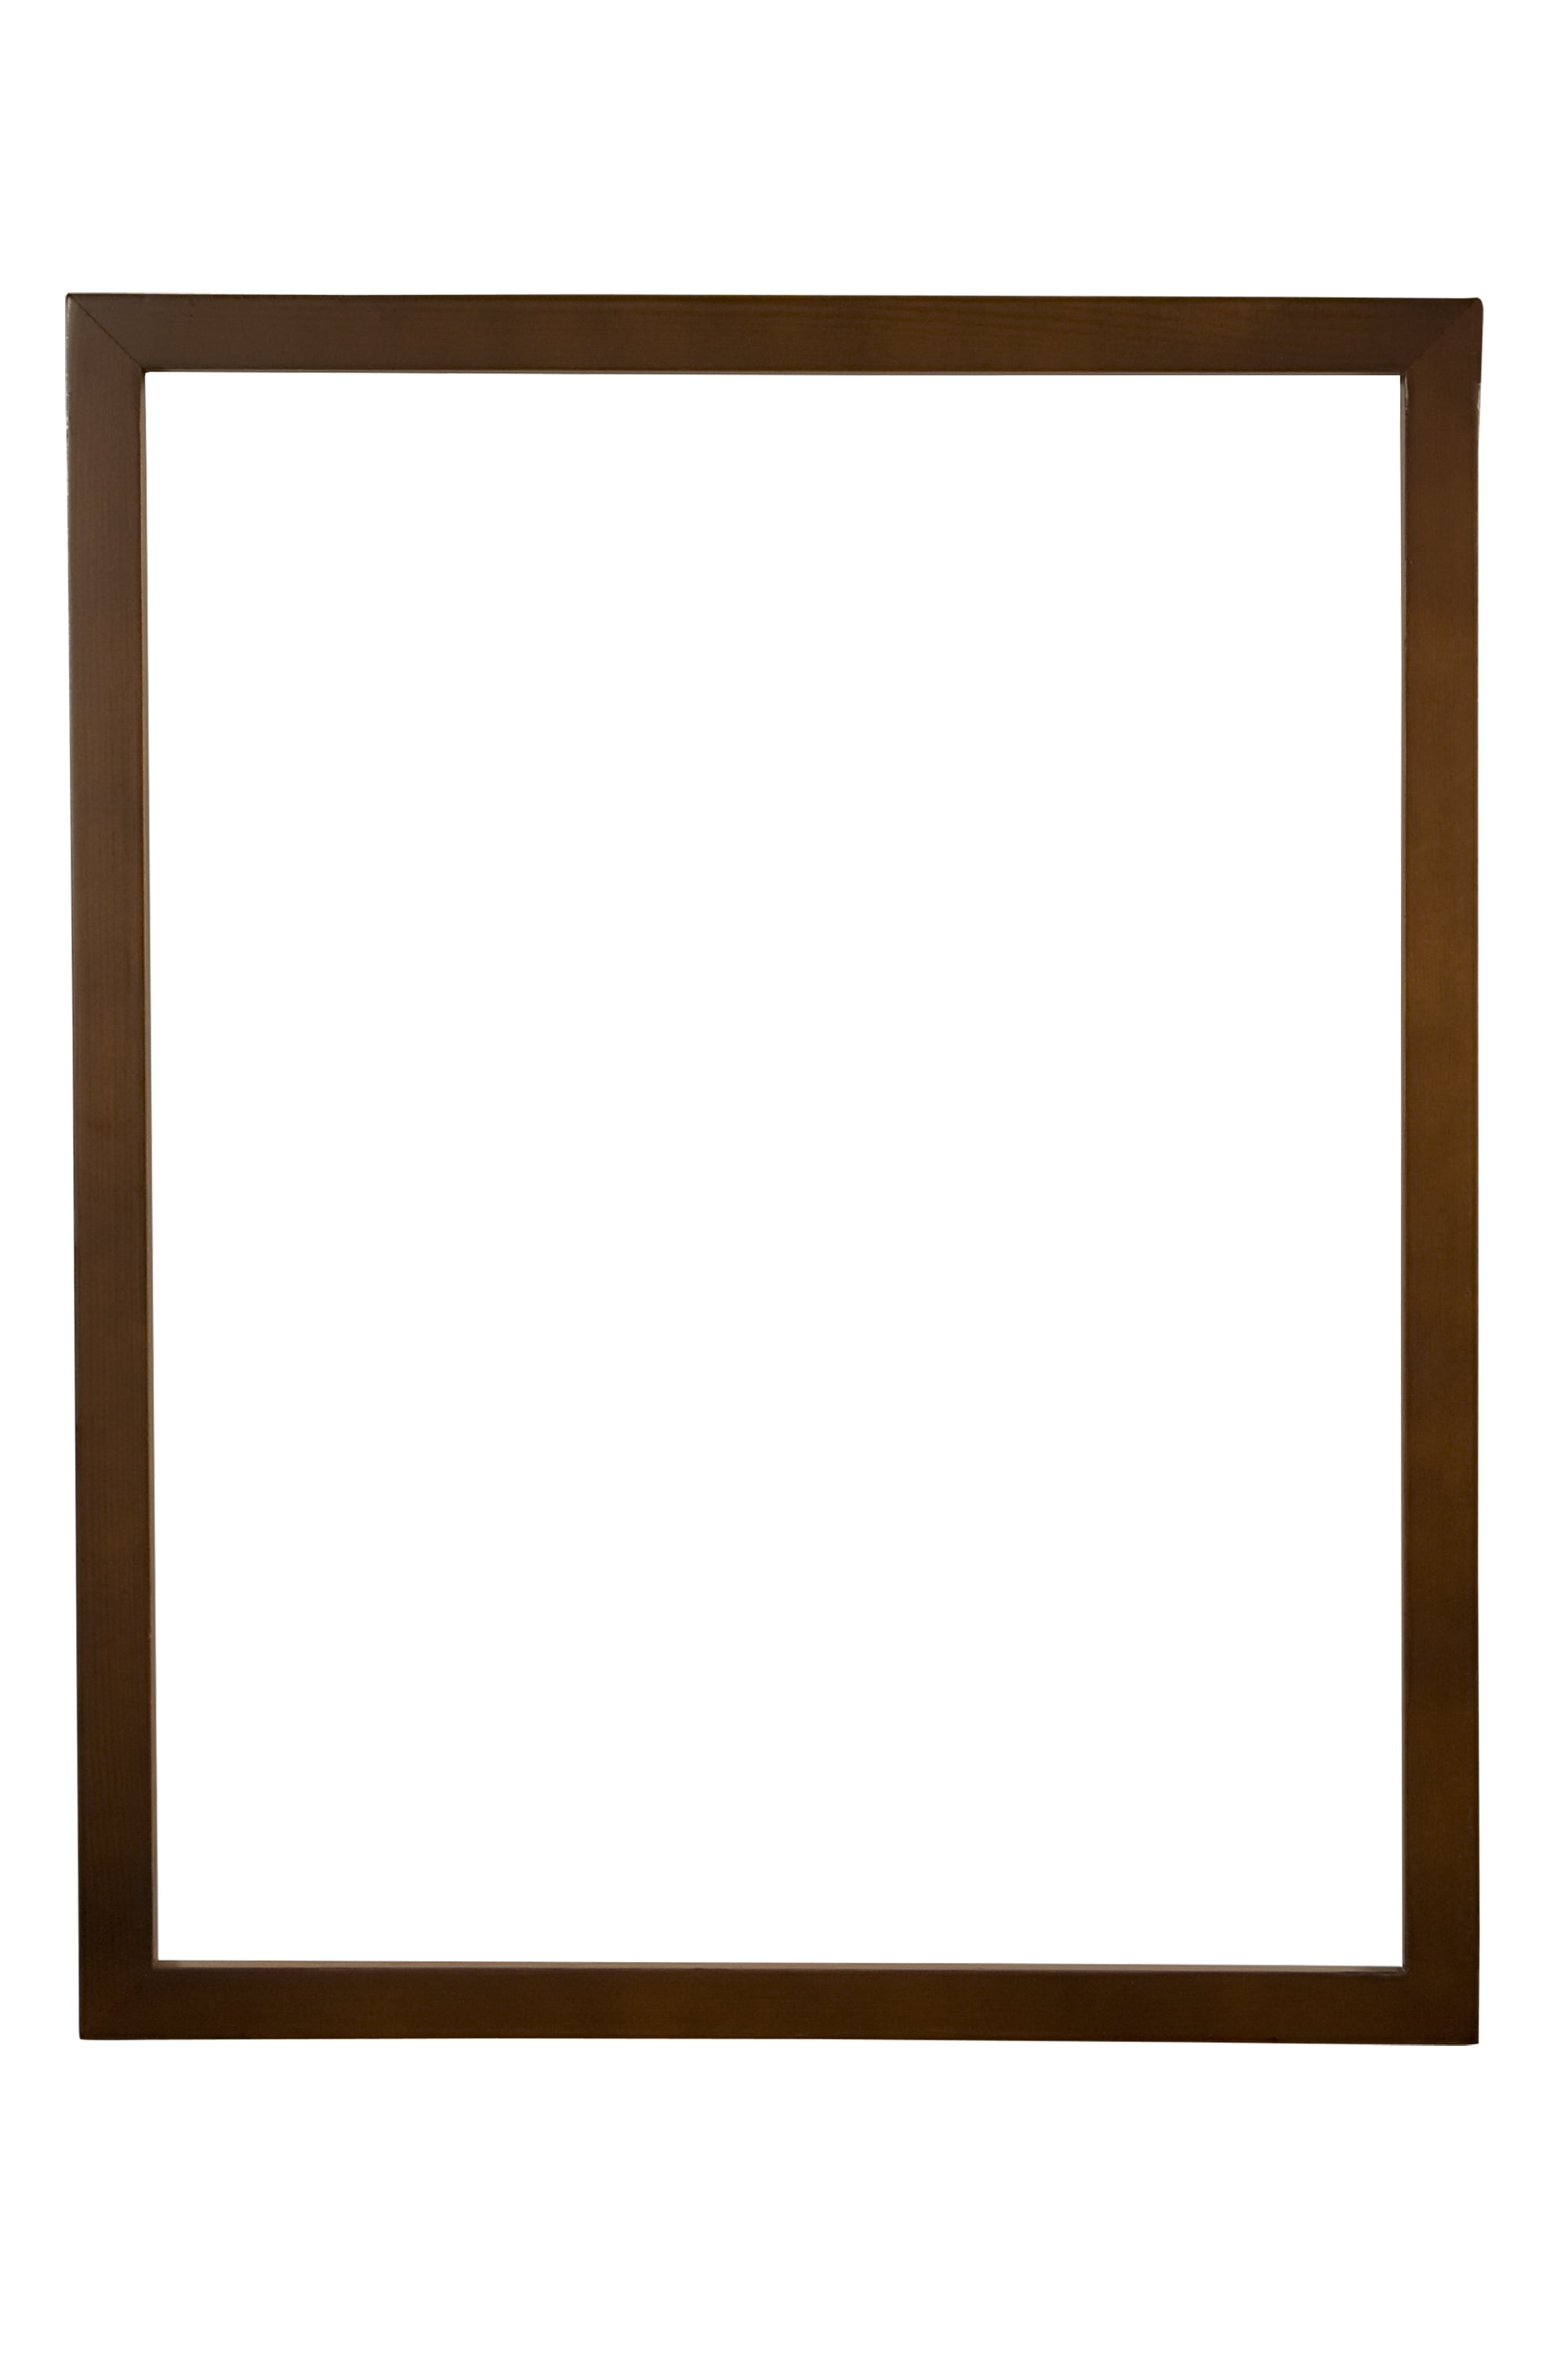 Ambiance Gallery 16x20 Wood Picture Frame for Stretched Canvas, Artist Panels and Art Boards, Single, Walnut - 4 Pack, Size: 16 x 20, Brown